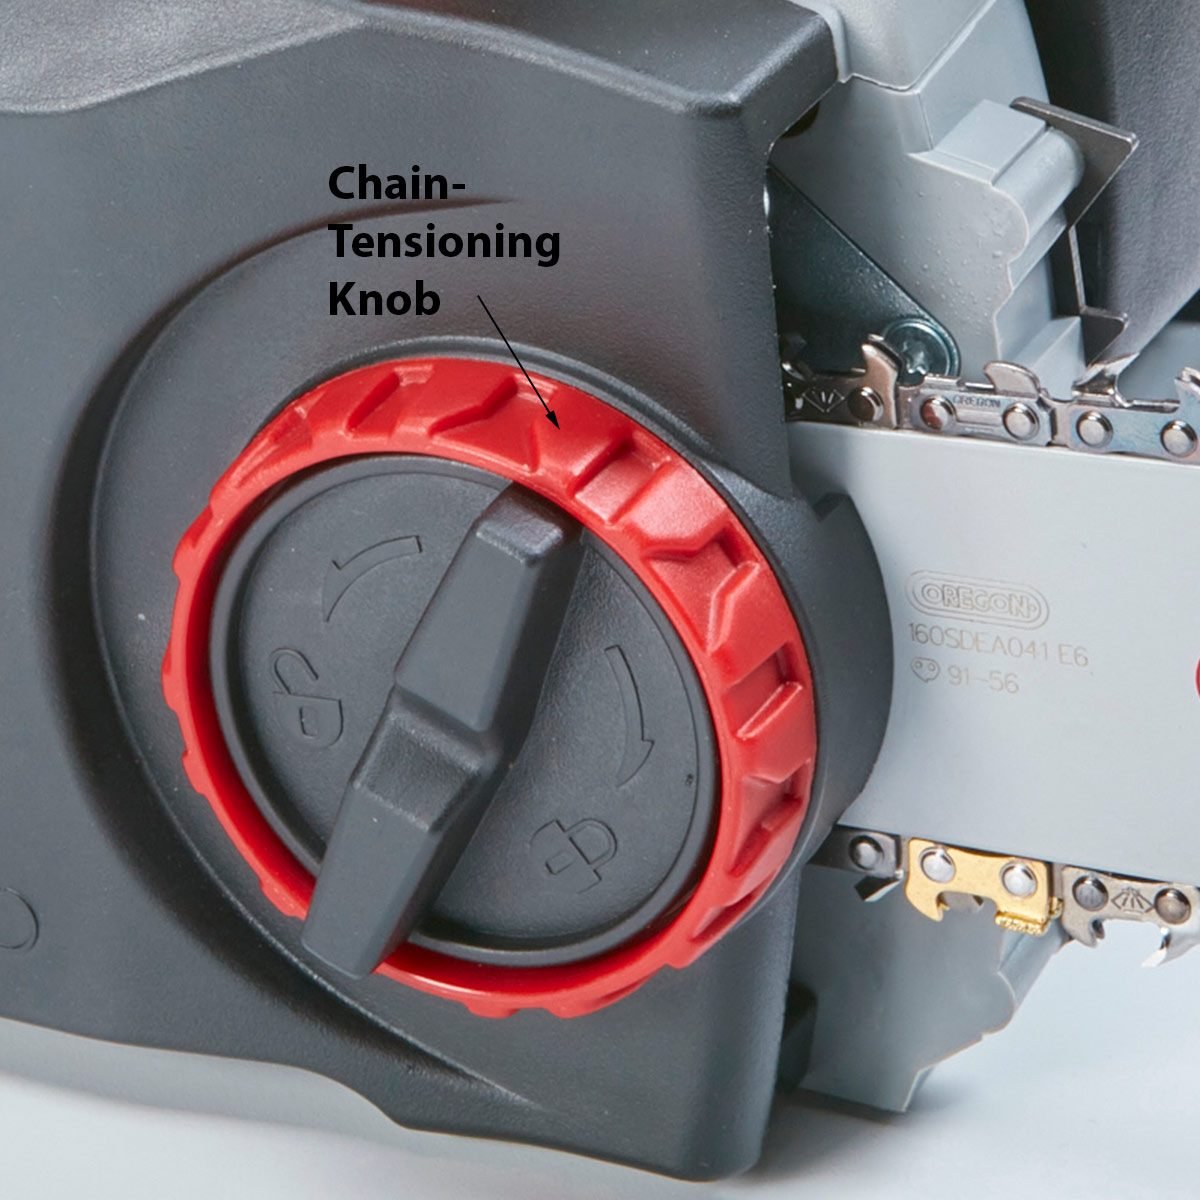 Tool-free chain tensioning